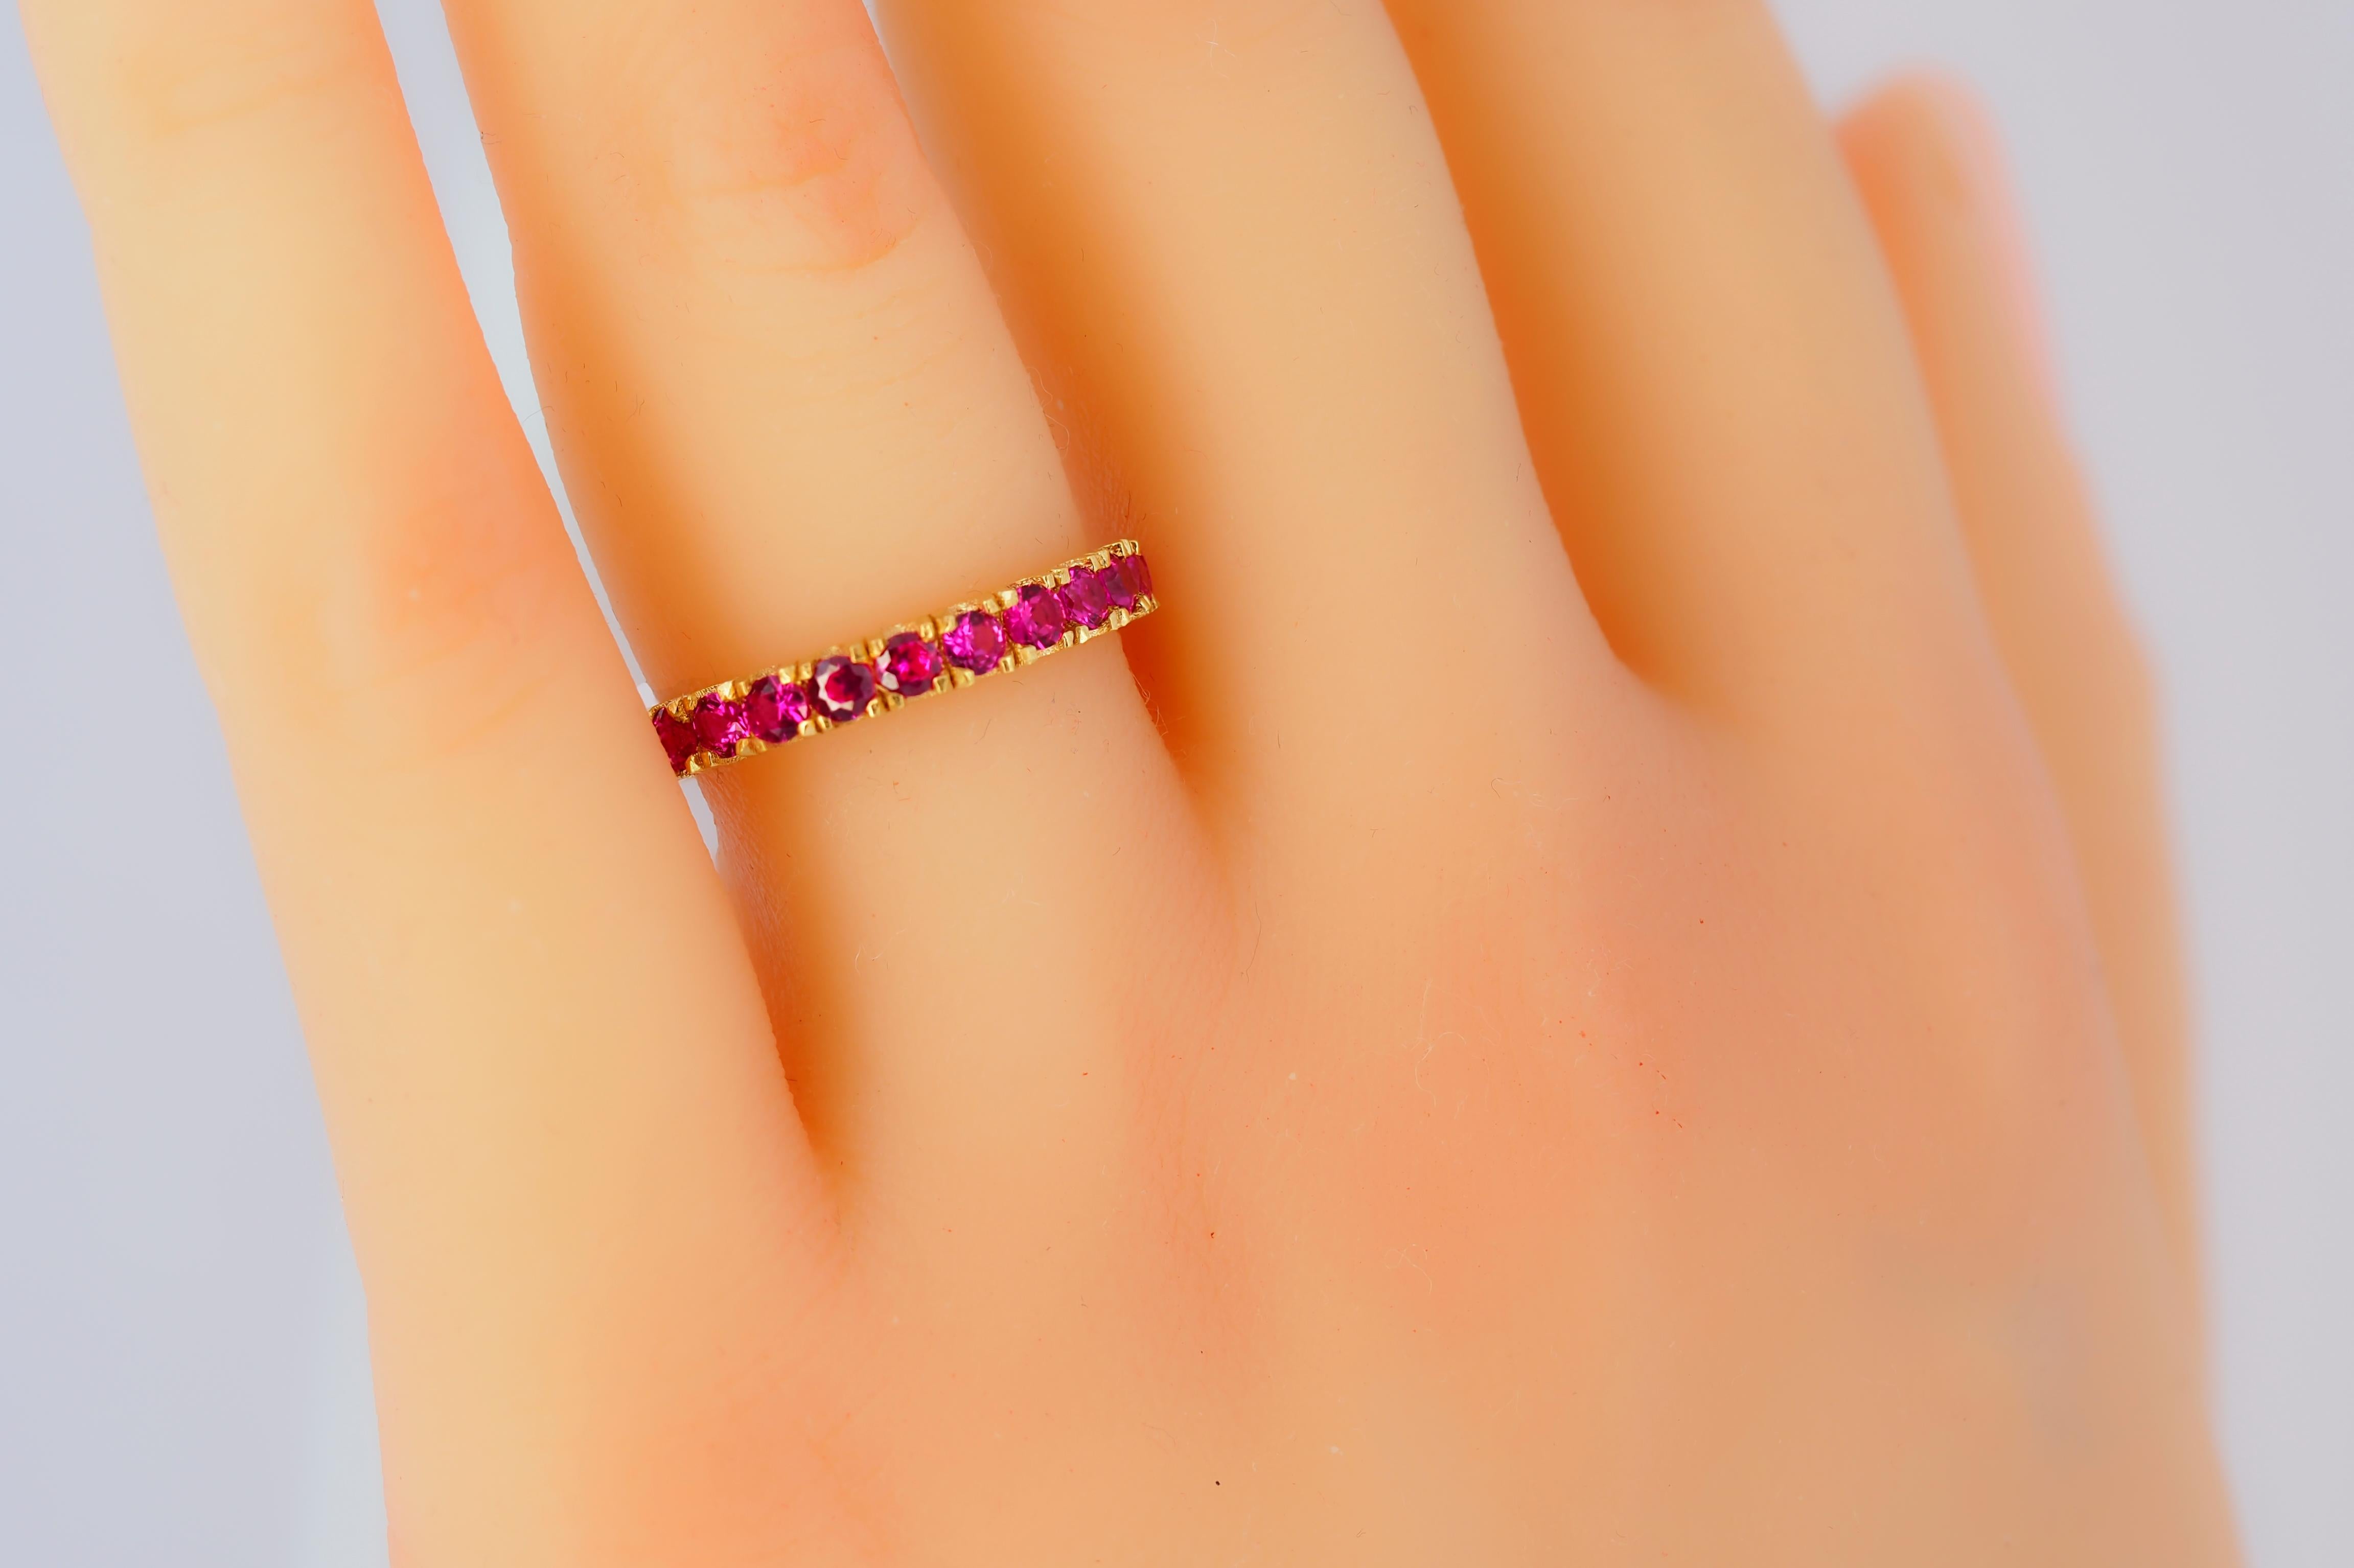 For Sale:  Pinkish red gemstone 14k gold eternity ring band. 5